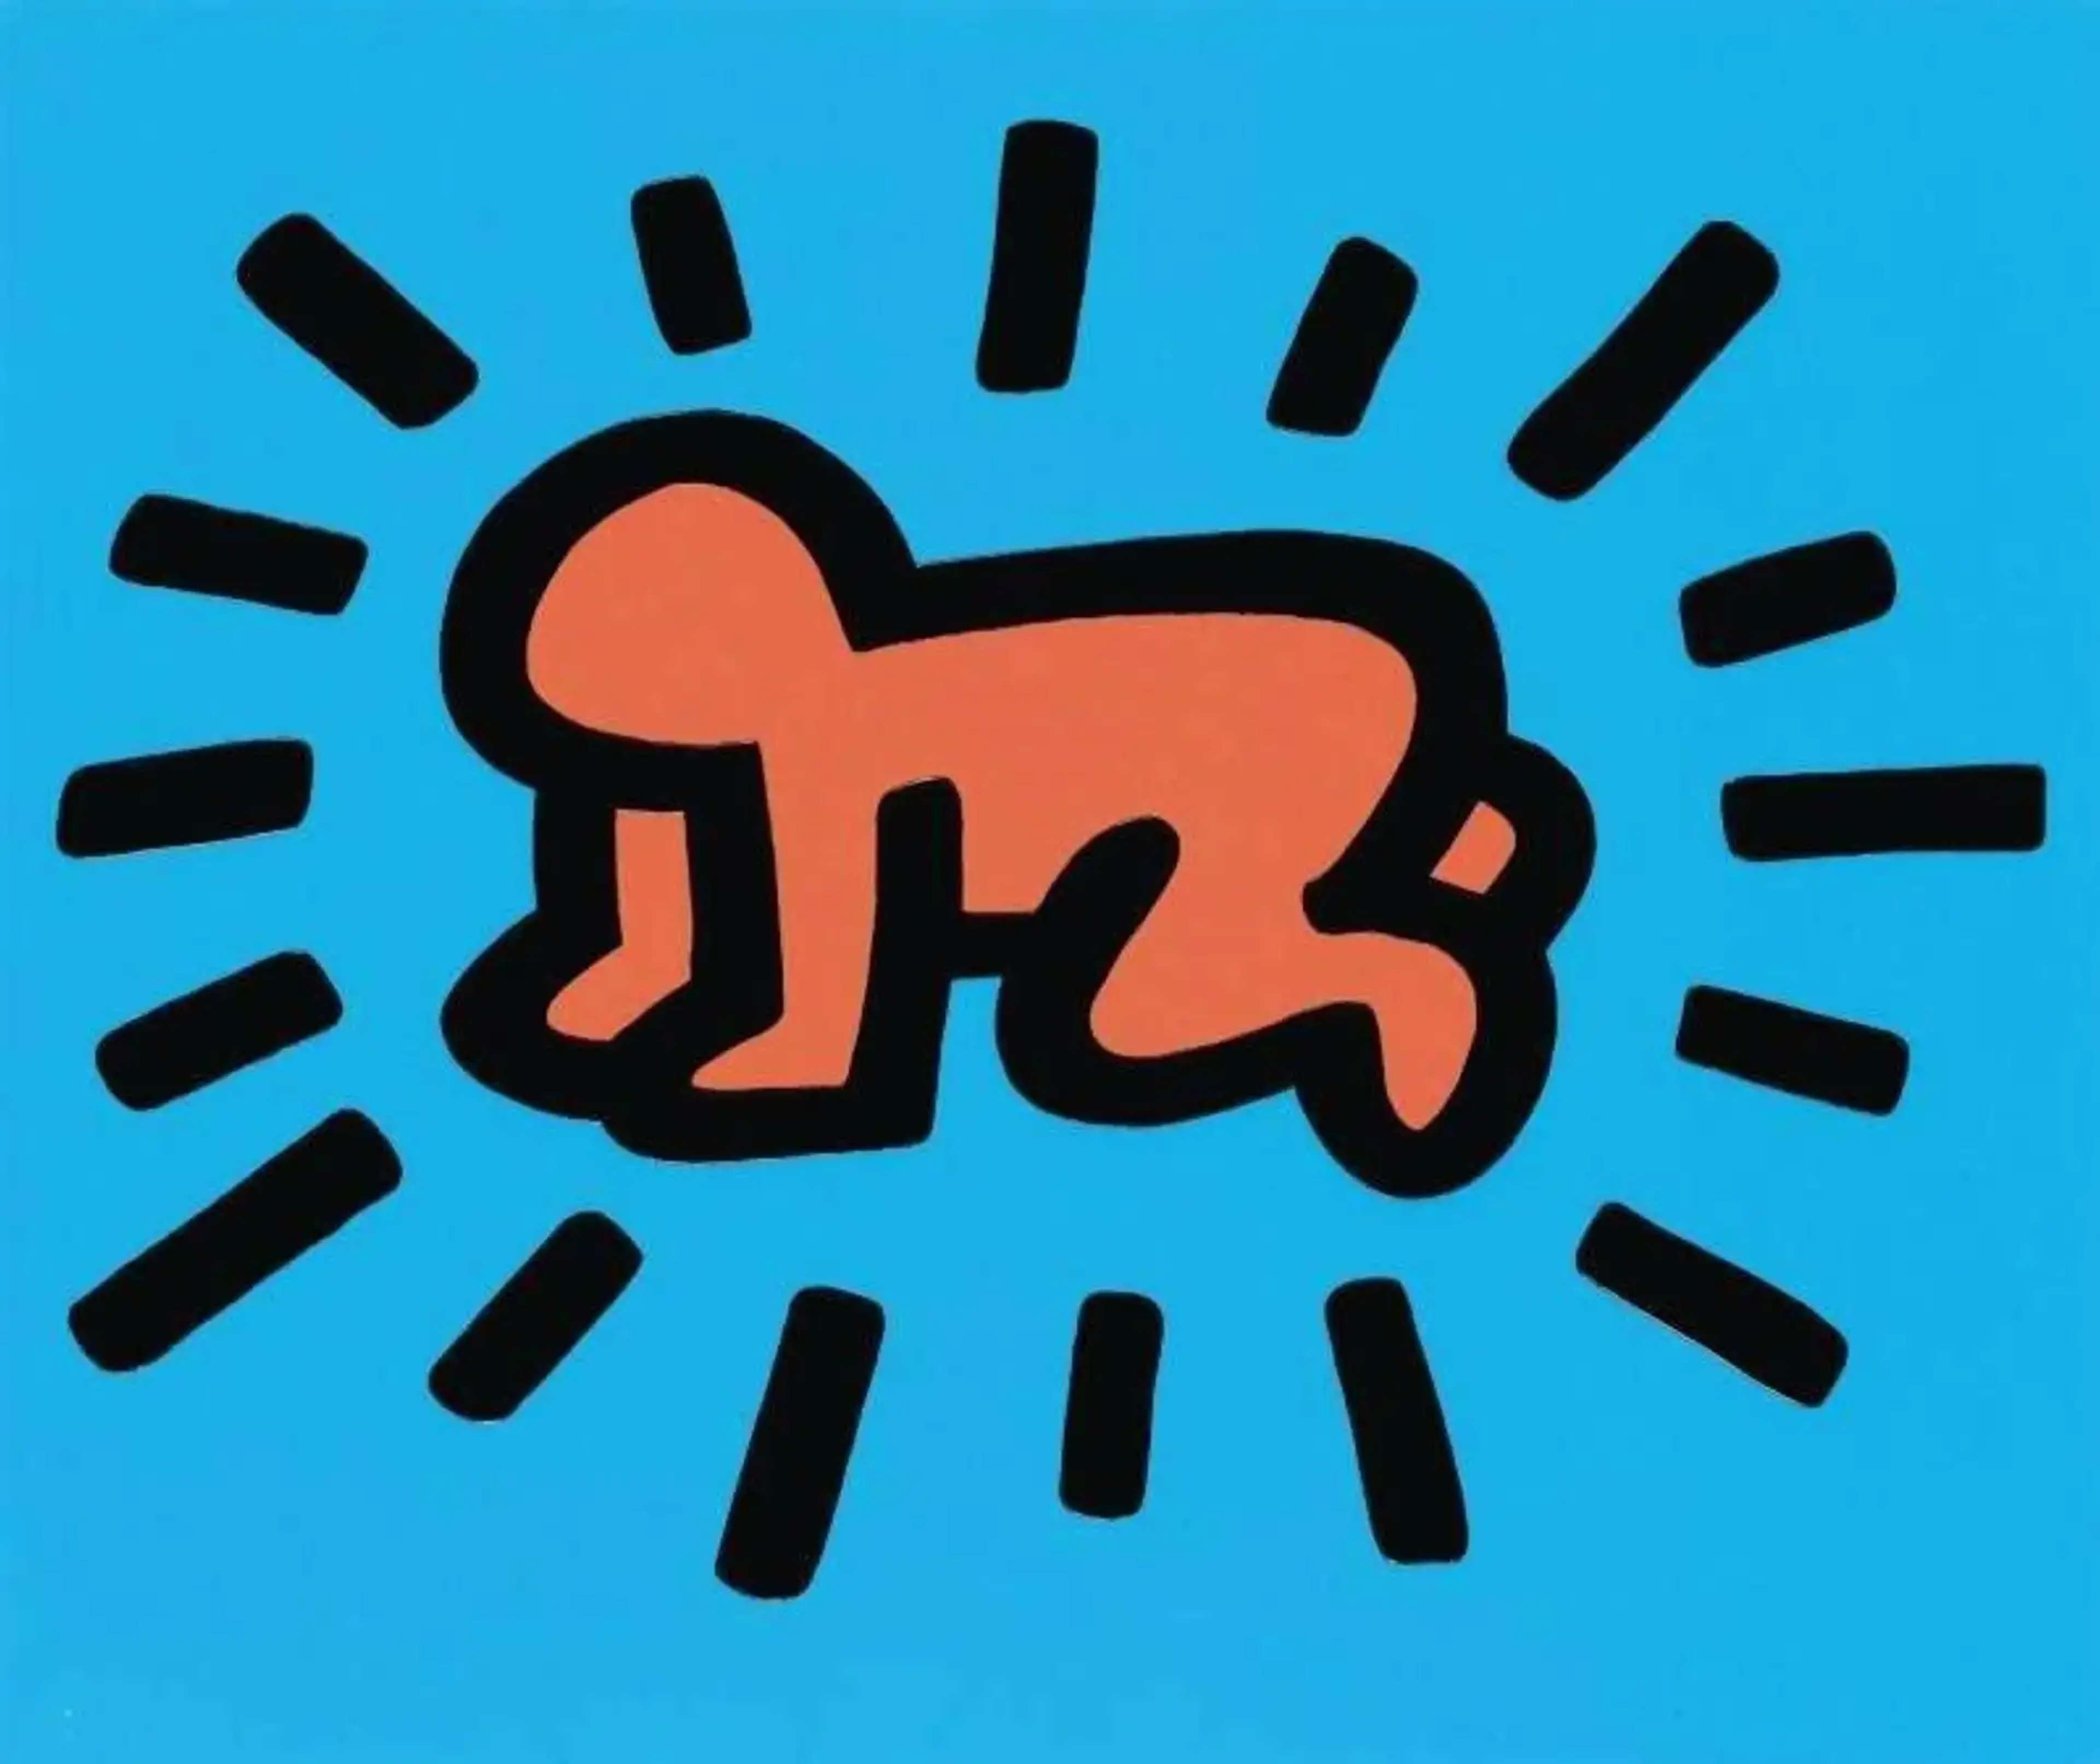 Radiant Baby by Keith Haring